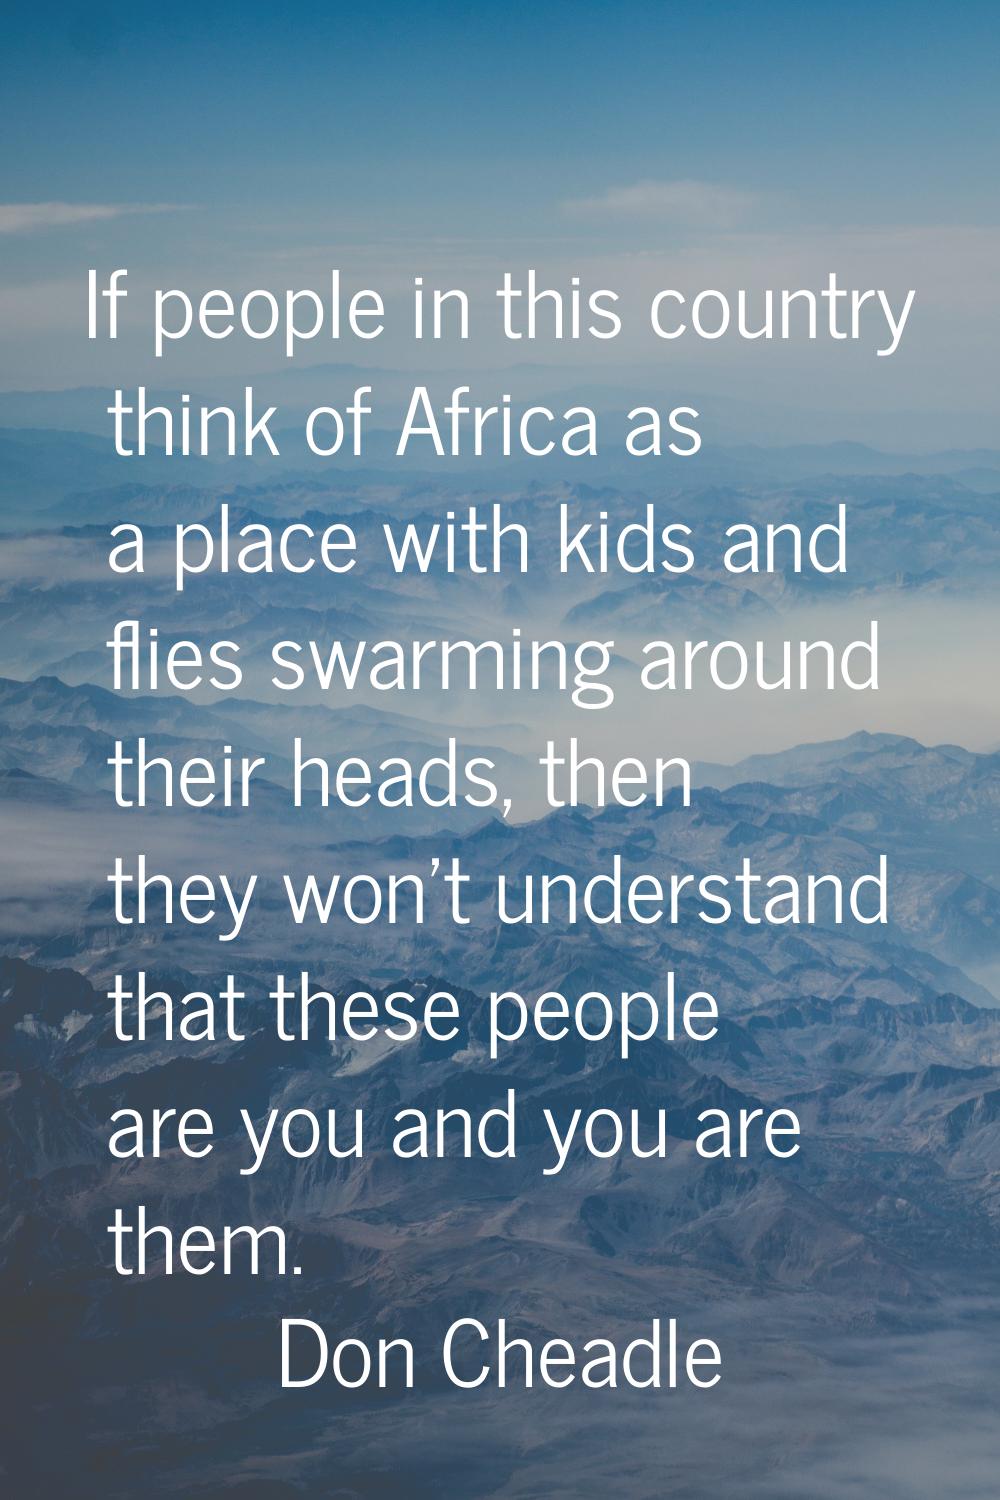 If people in this country think of Africa as a place with kids and flies swarming around their head